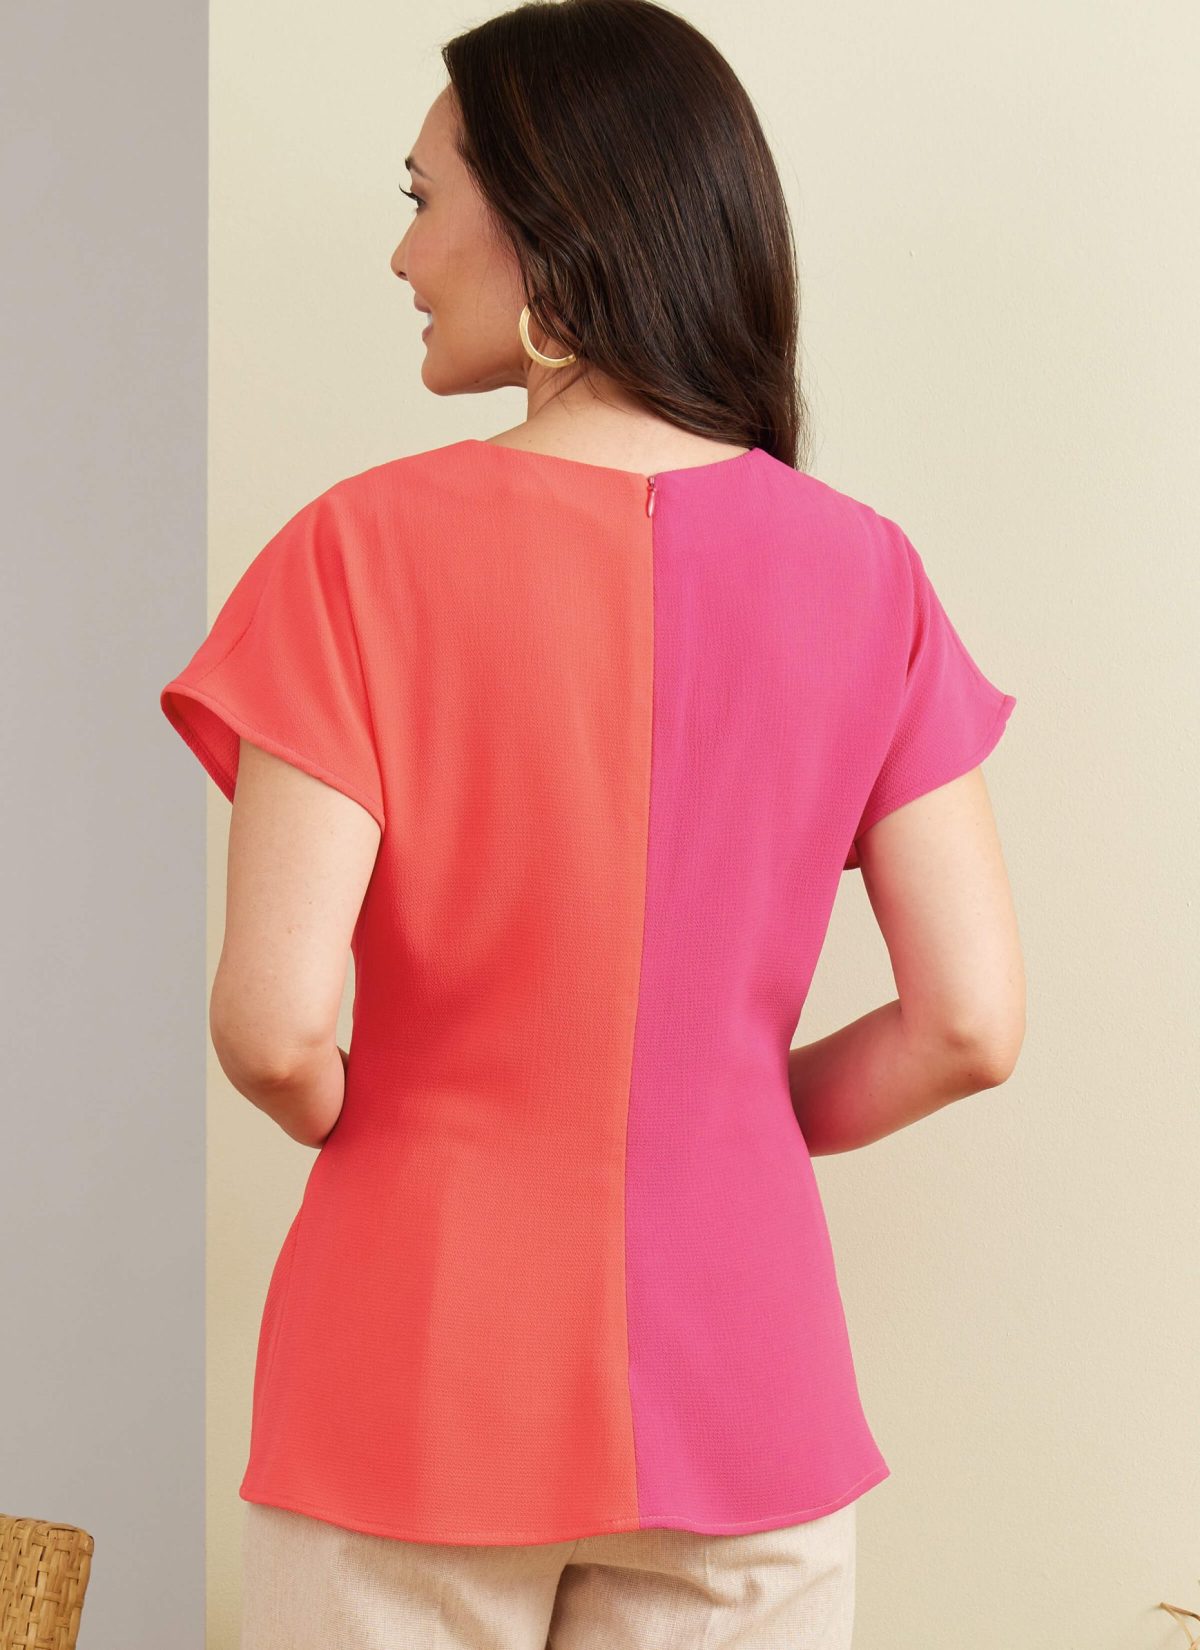 Butterick Sewing Pattern B6899 Misses' Top